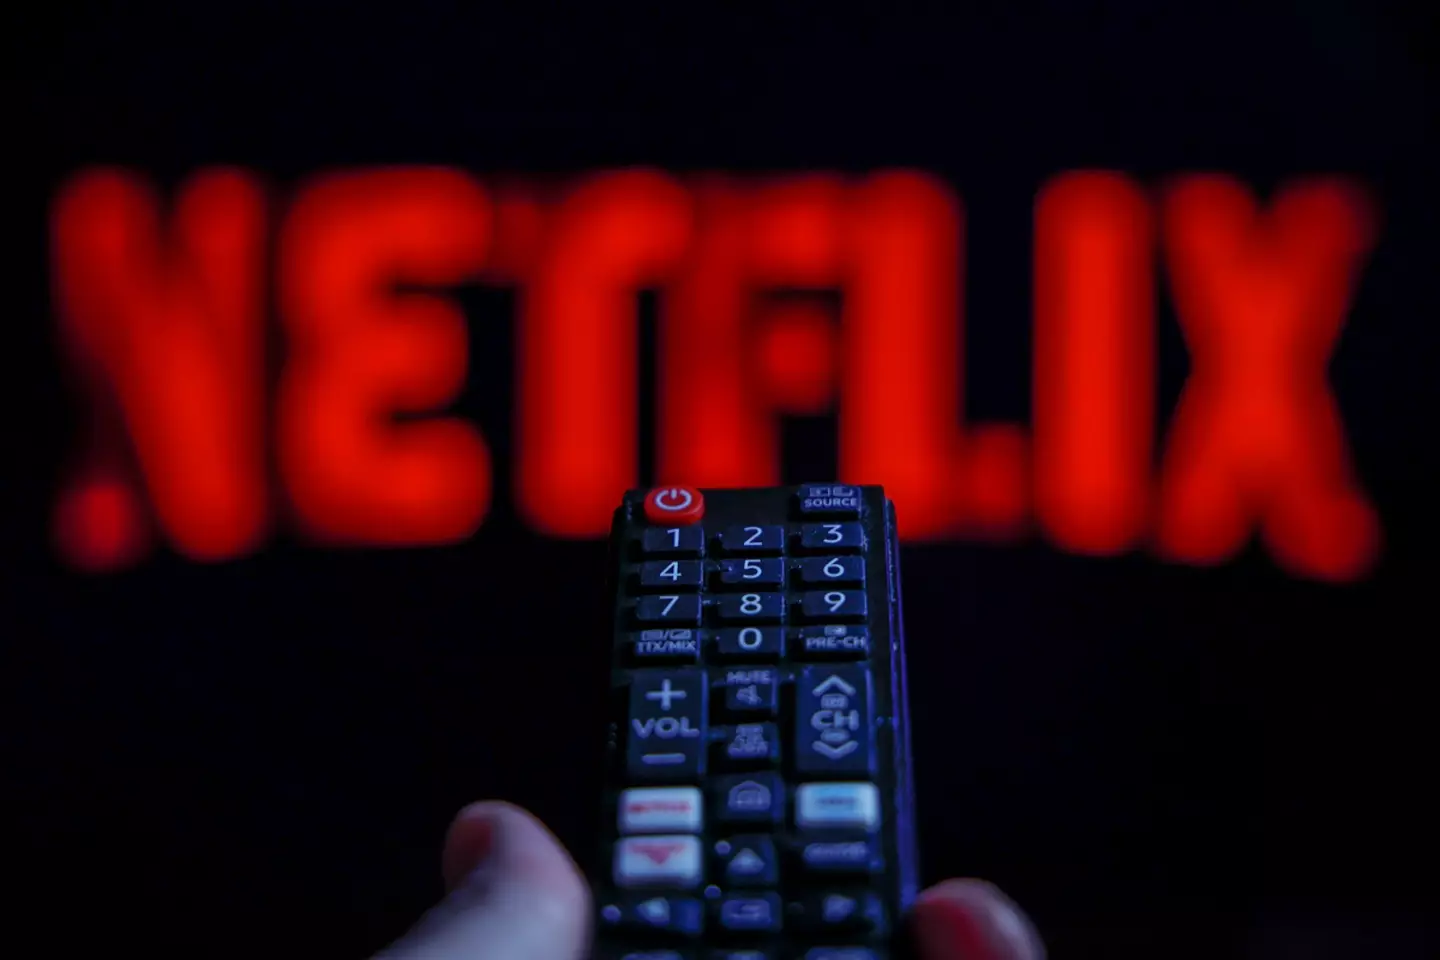 Netflix's price increase comes as it continues to deliver new content.